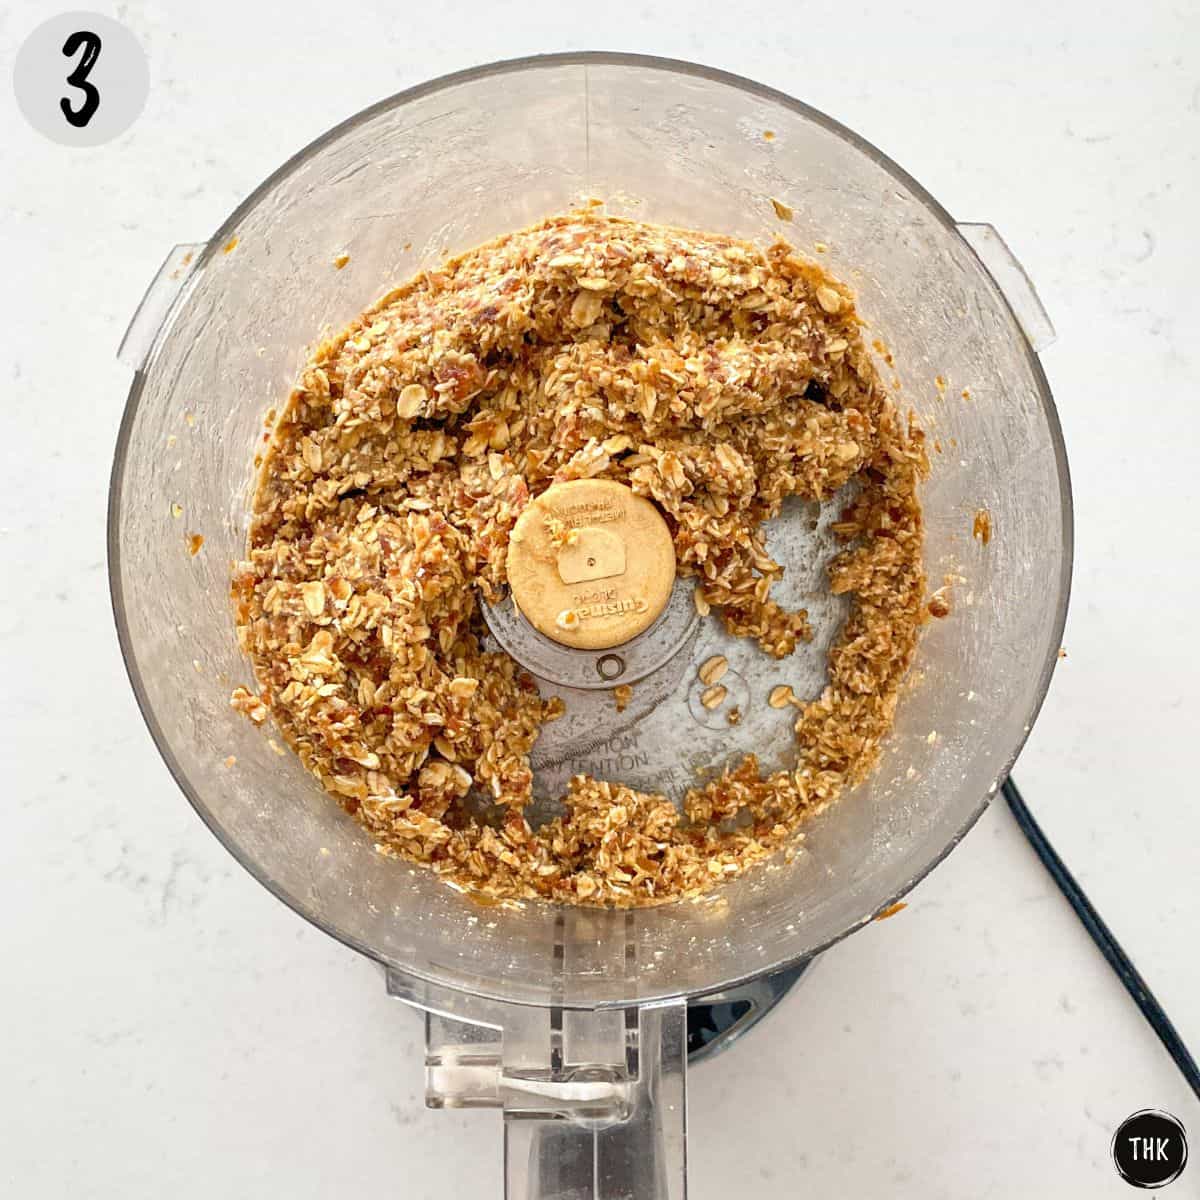 Date and oat mixture in bowl of food processor.